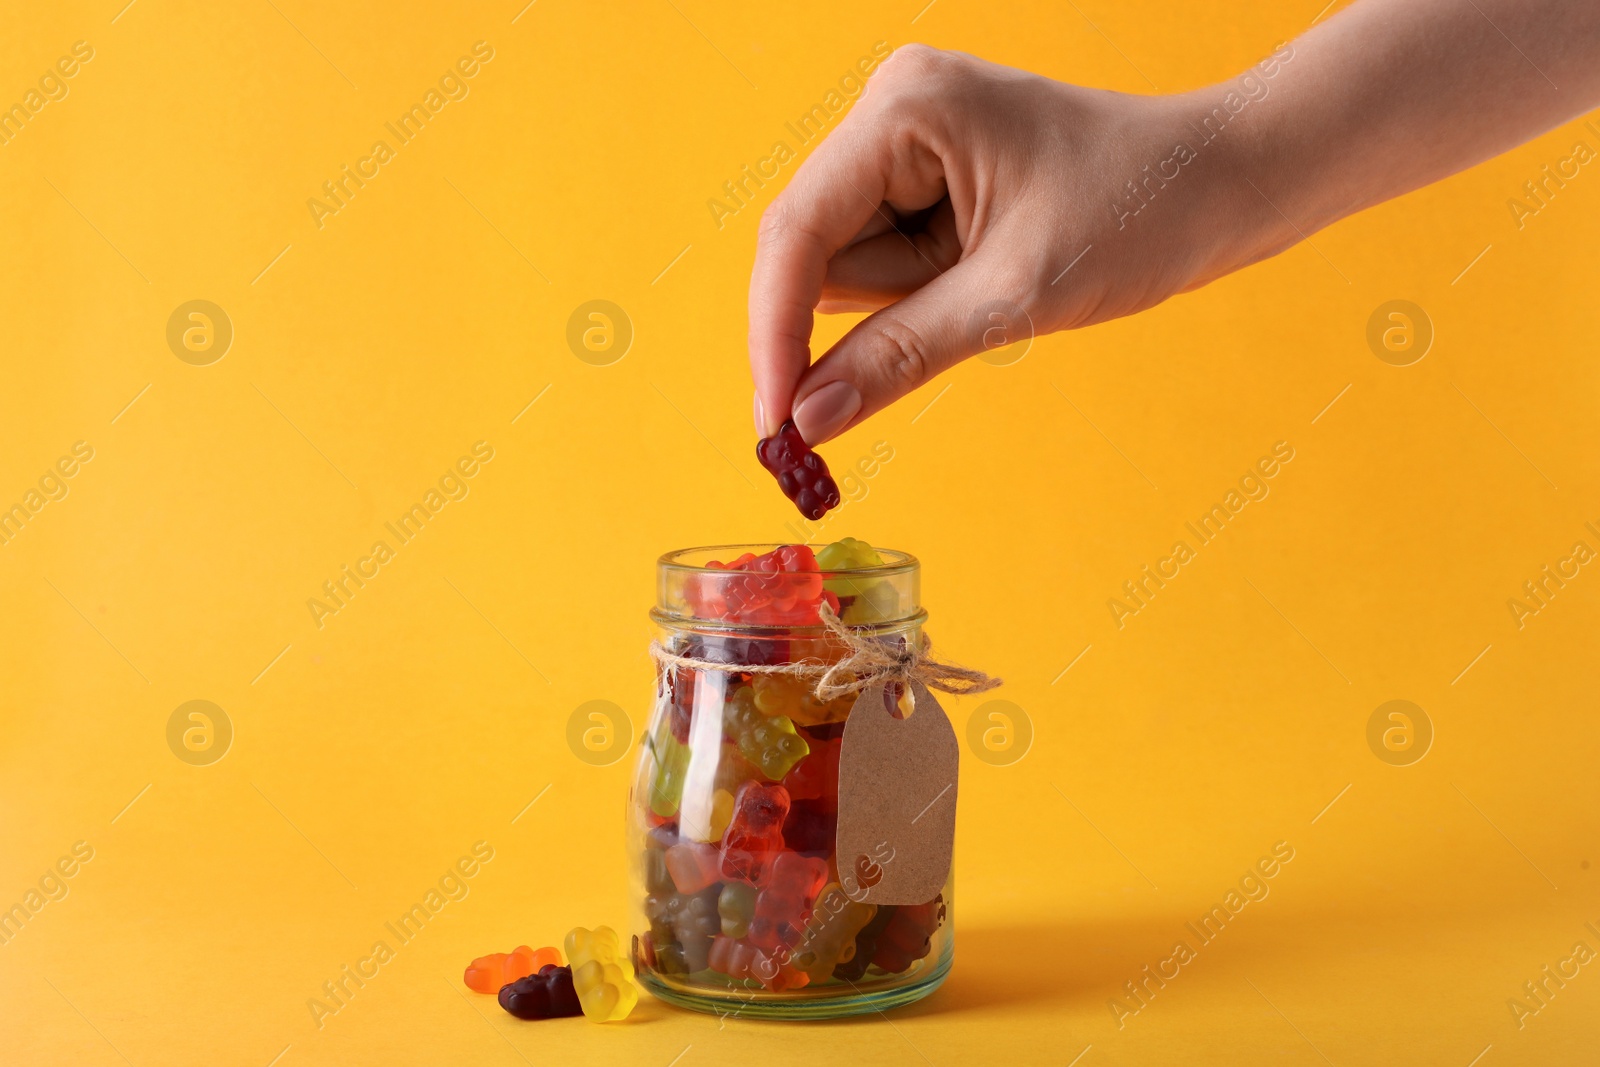 Photo of Woman taking gummy bear candy from glass jar on yellow background, closeup